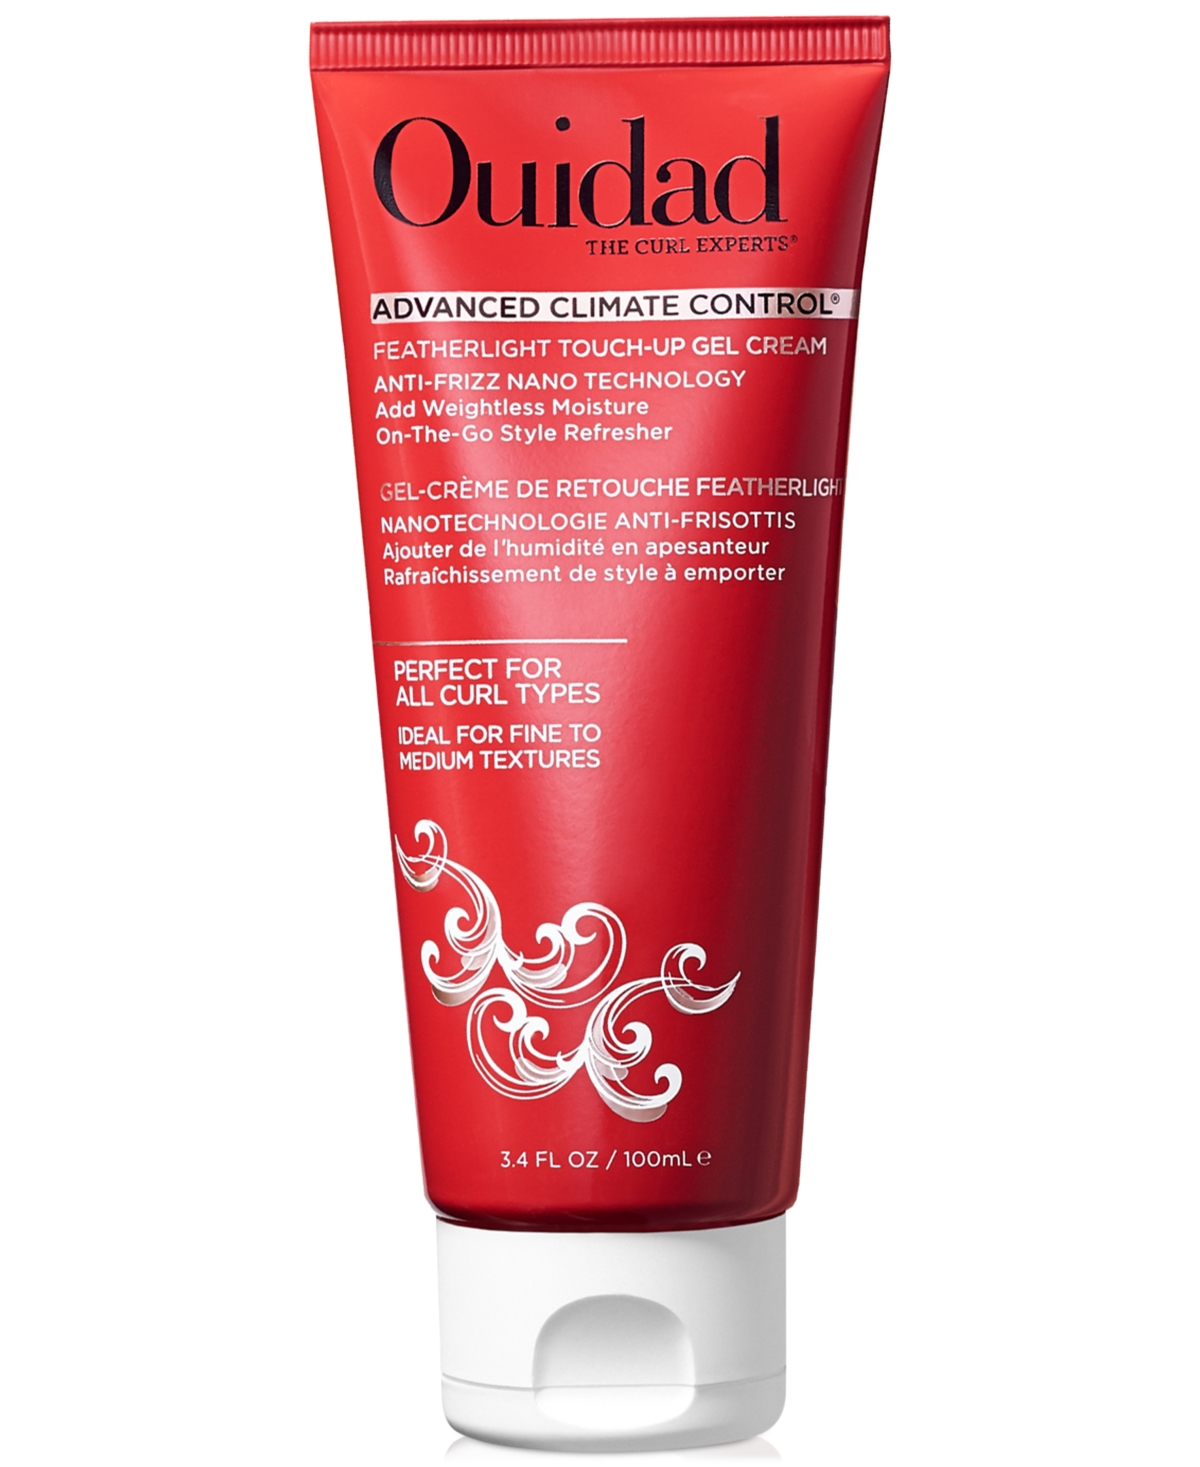 Ouidad Featherlight Touch-up Gel Cream